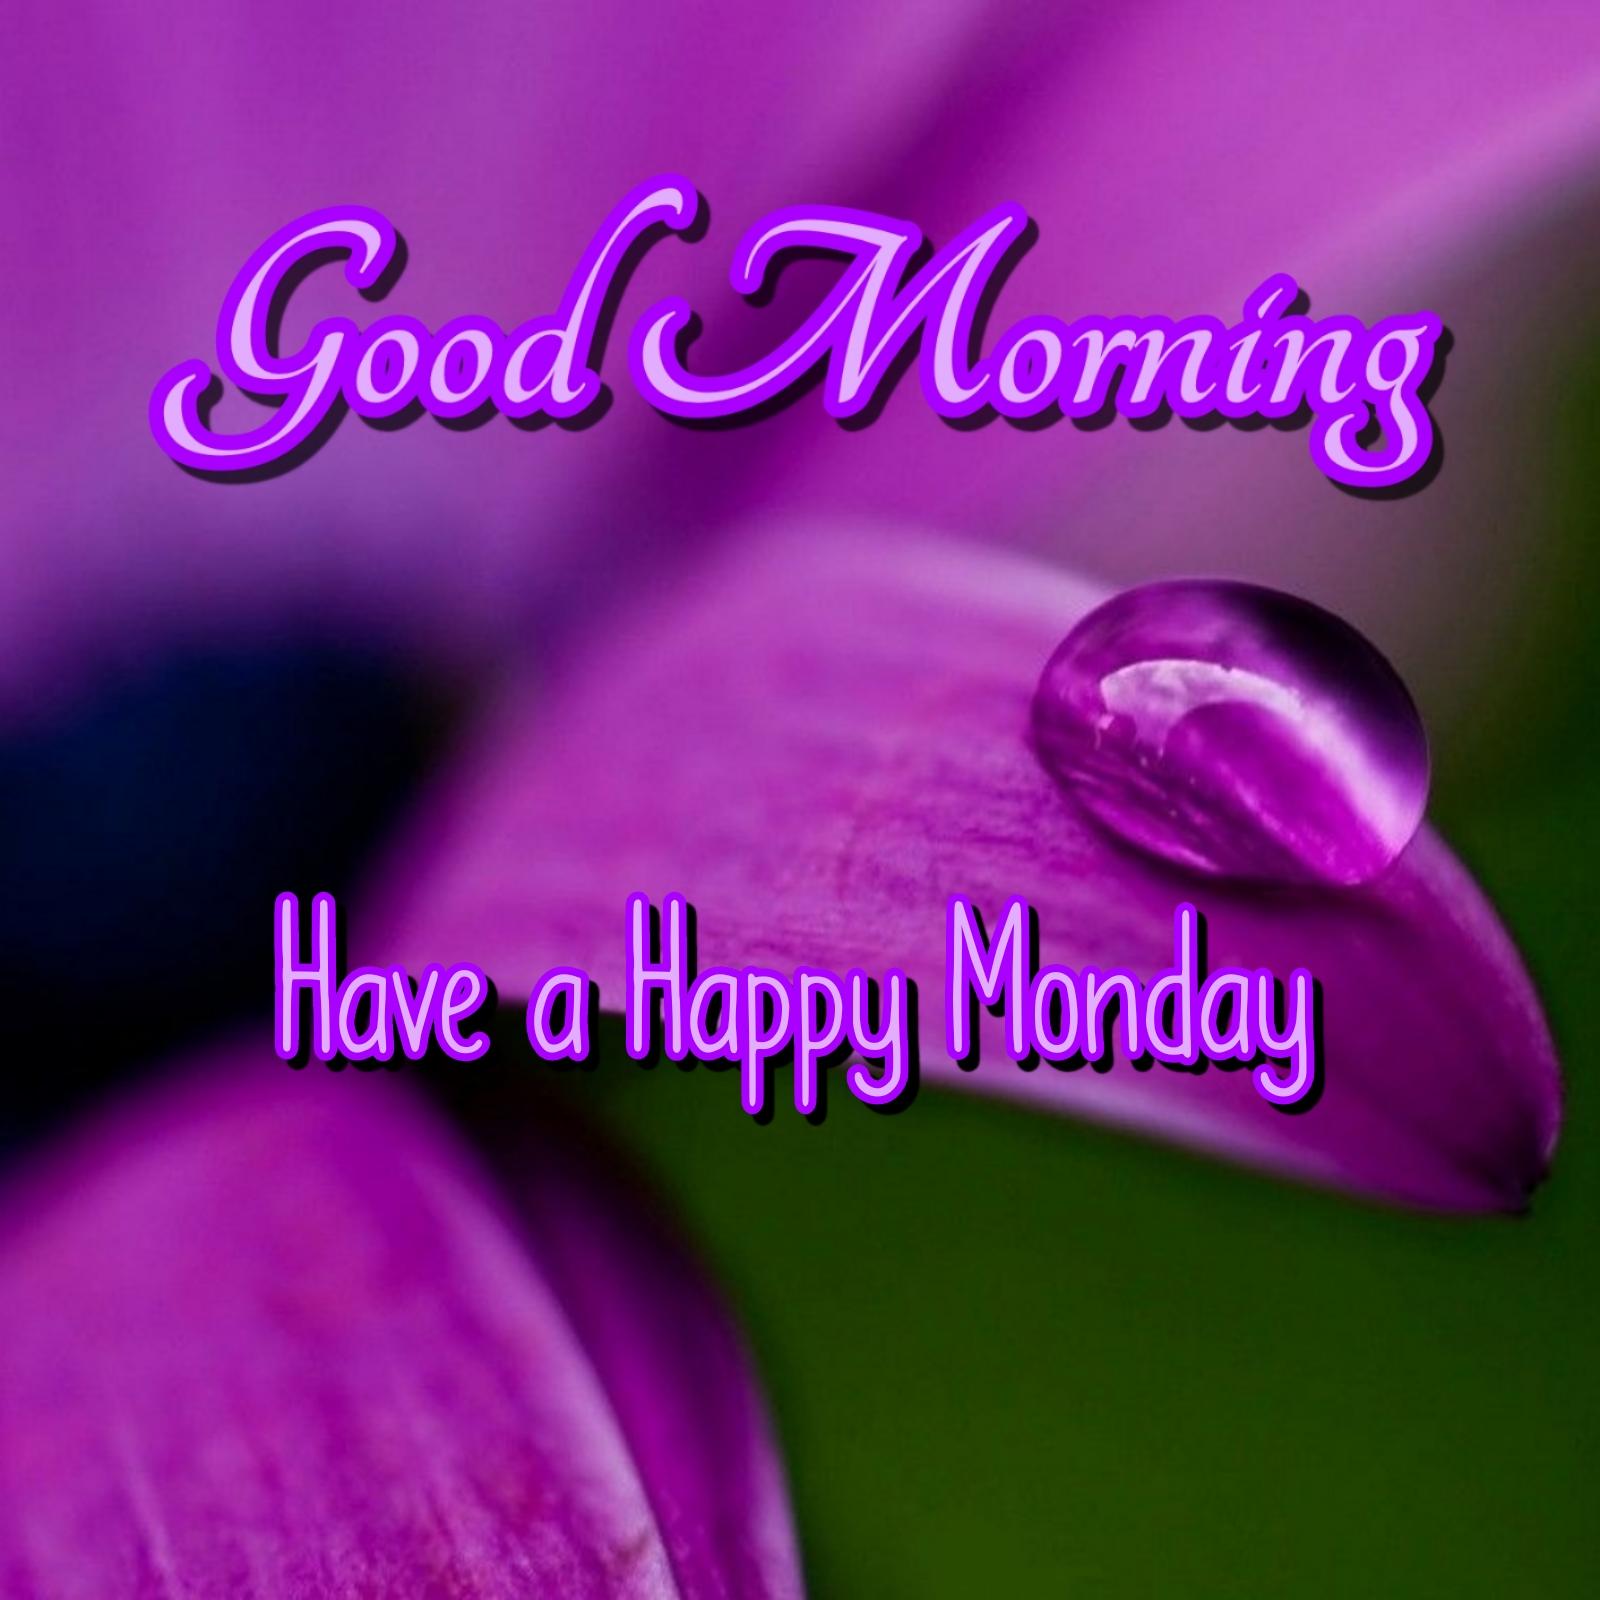 Good Morning Have a Happy Monday Images 